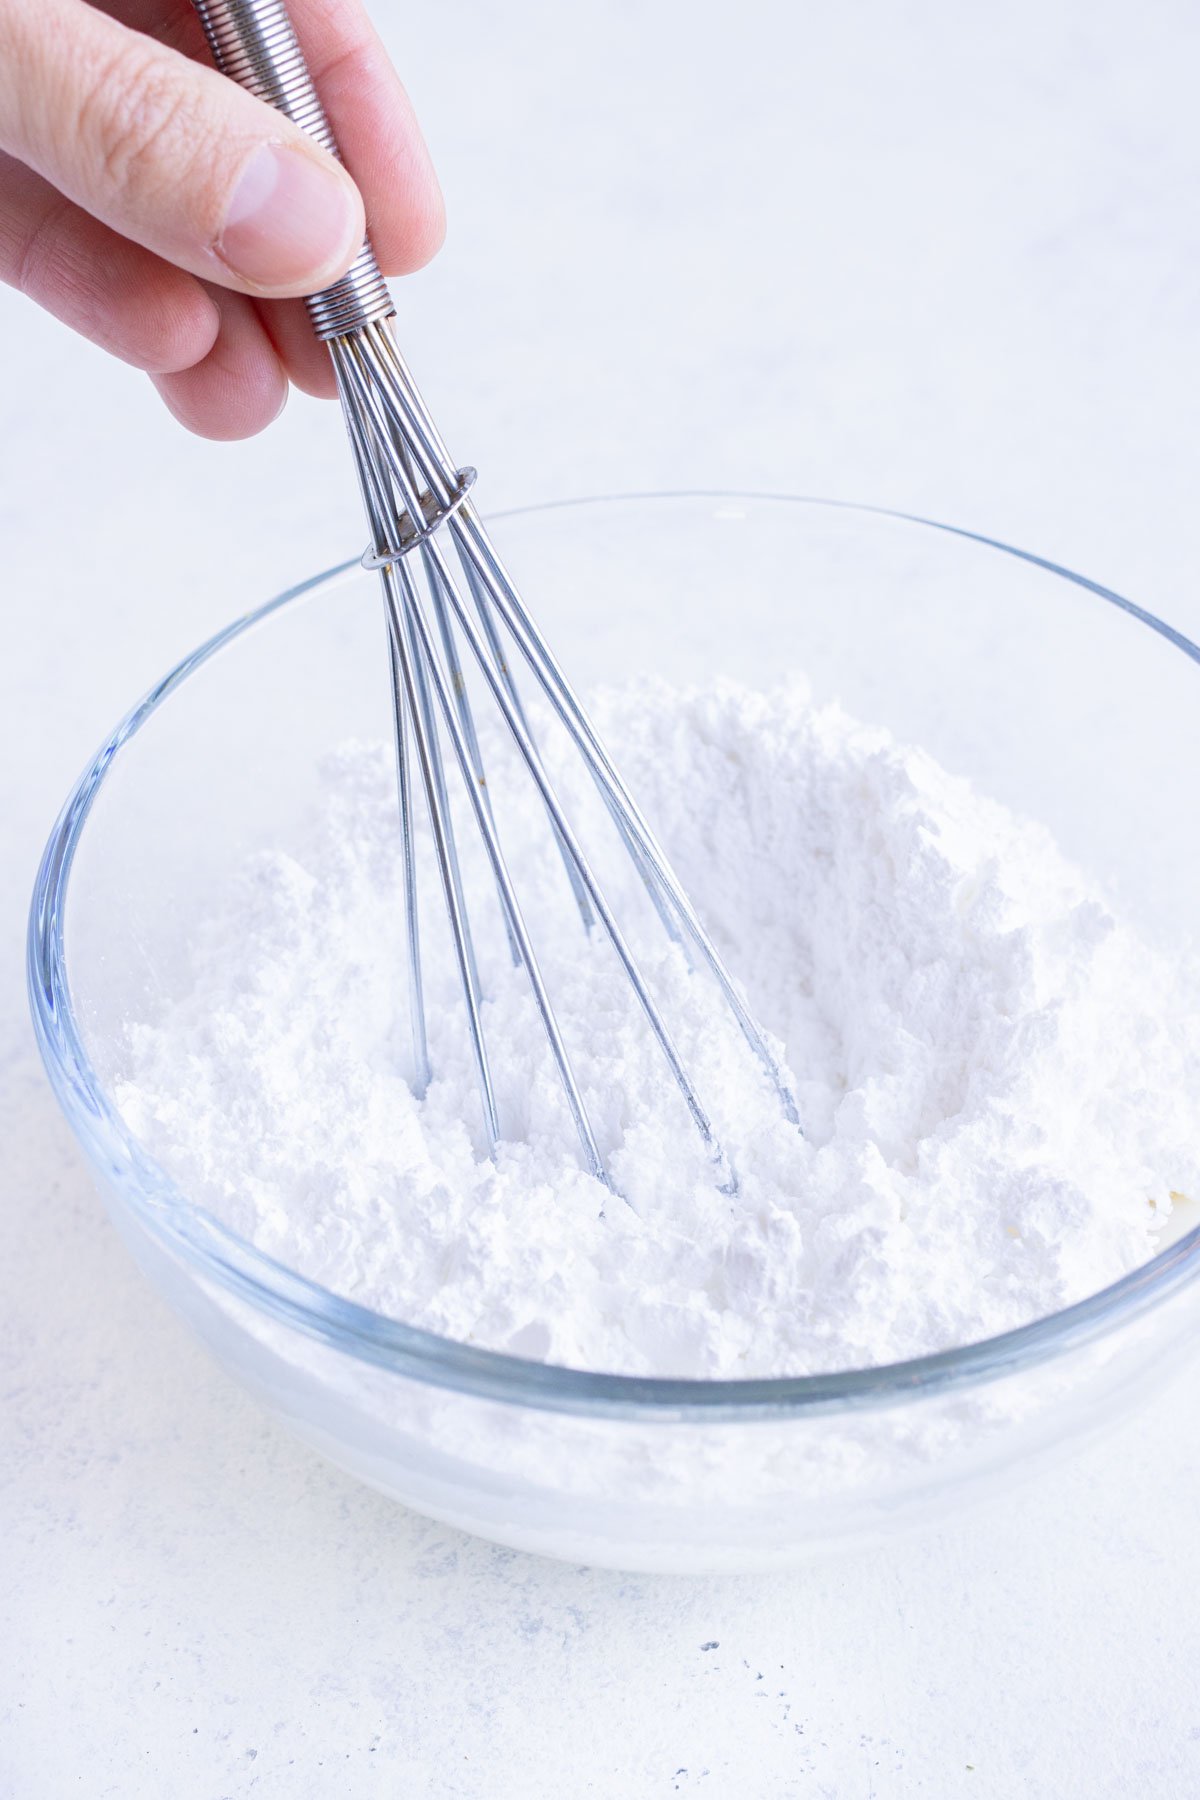 Powdered sugar is whisked together with milk and lemon juice.